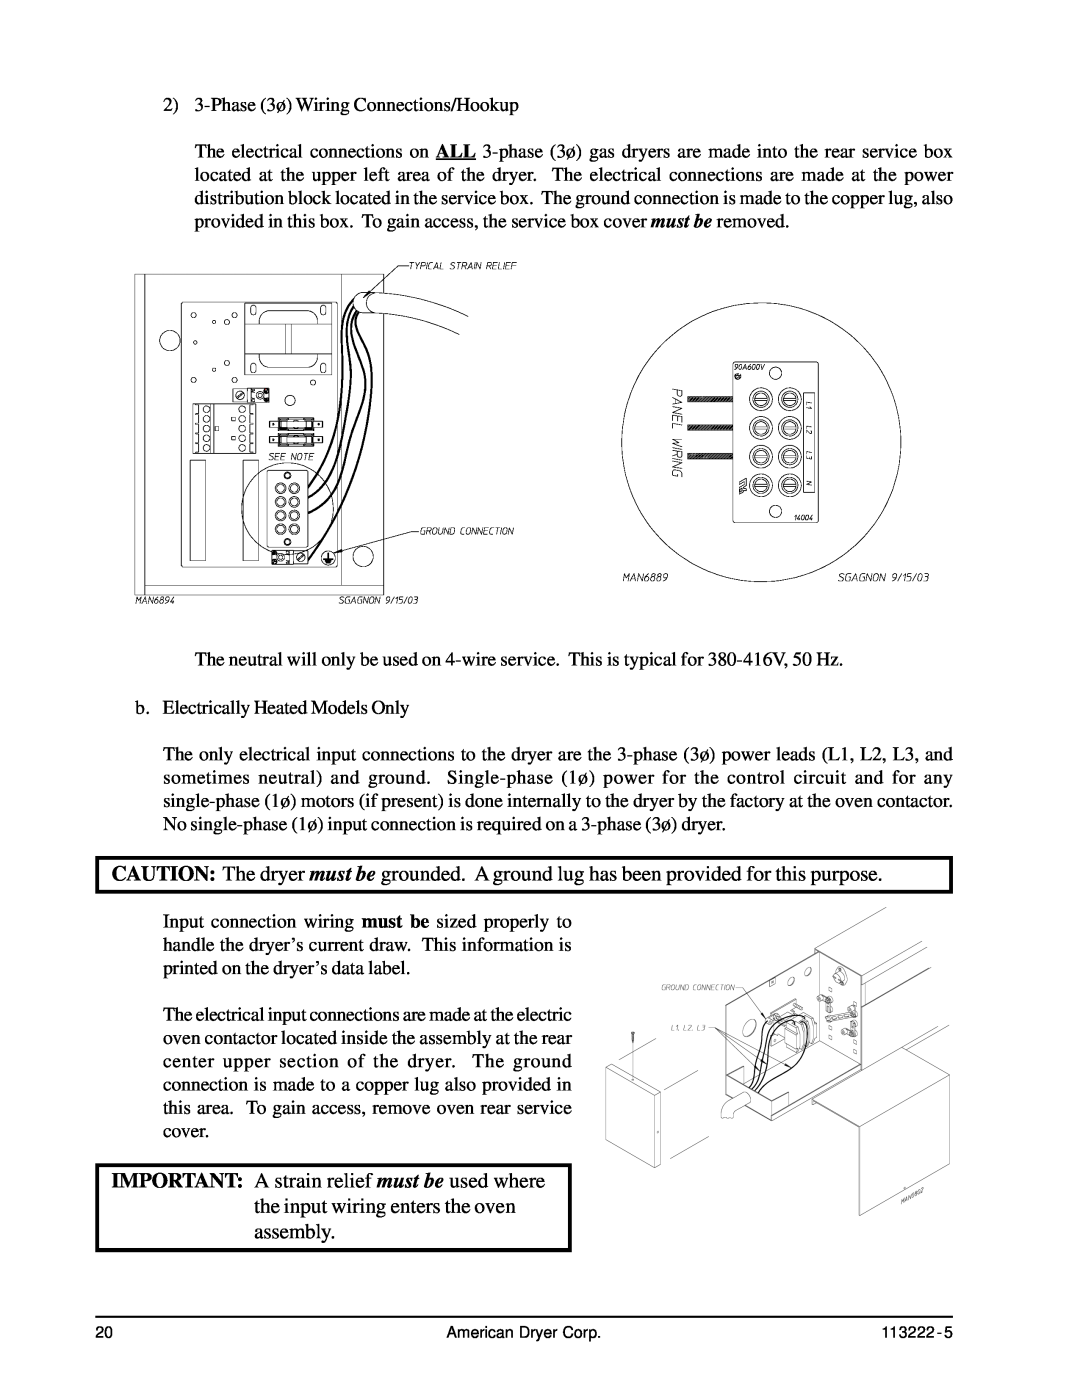 American Dryer Corp AD-24 Phase 7 installation manual 2 3-Phase 3ø Wiring Connections/Hookup 